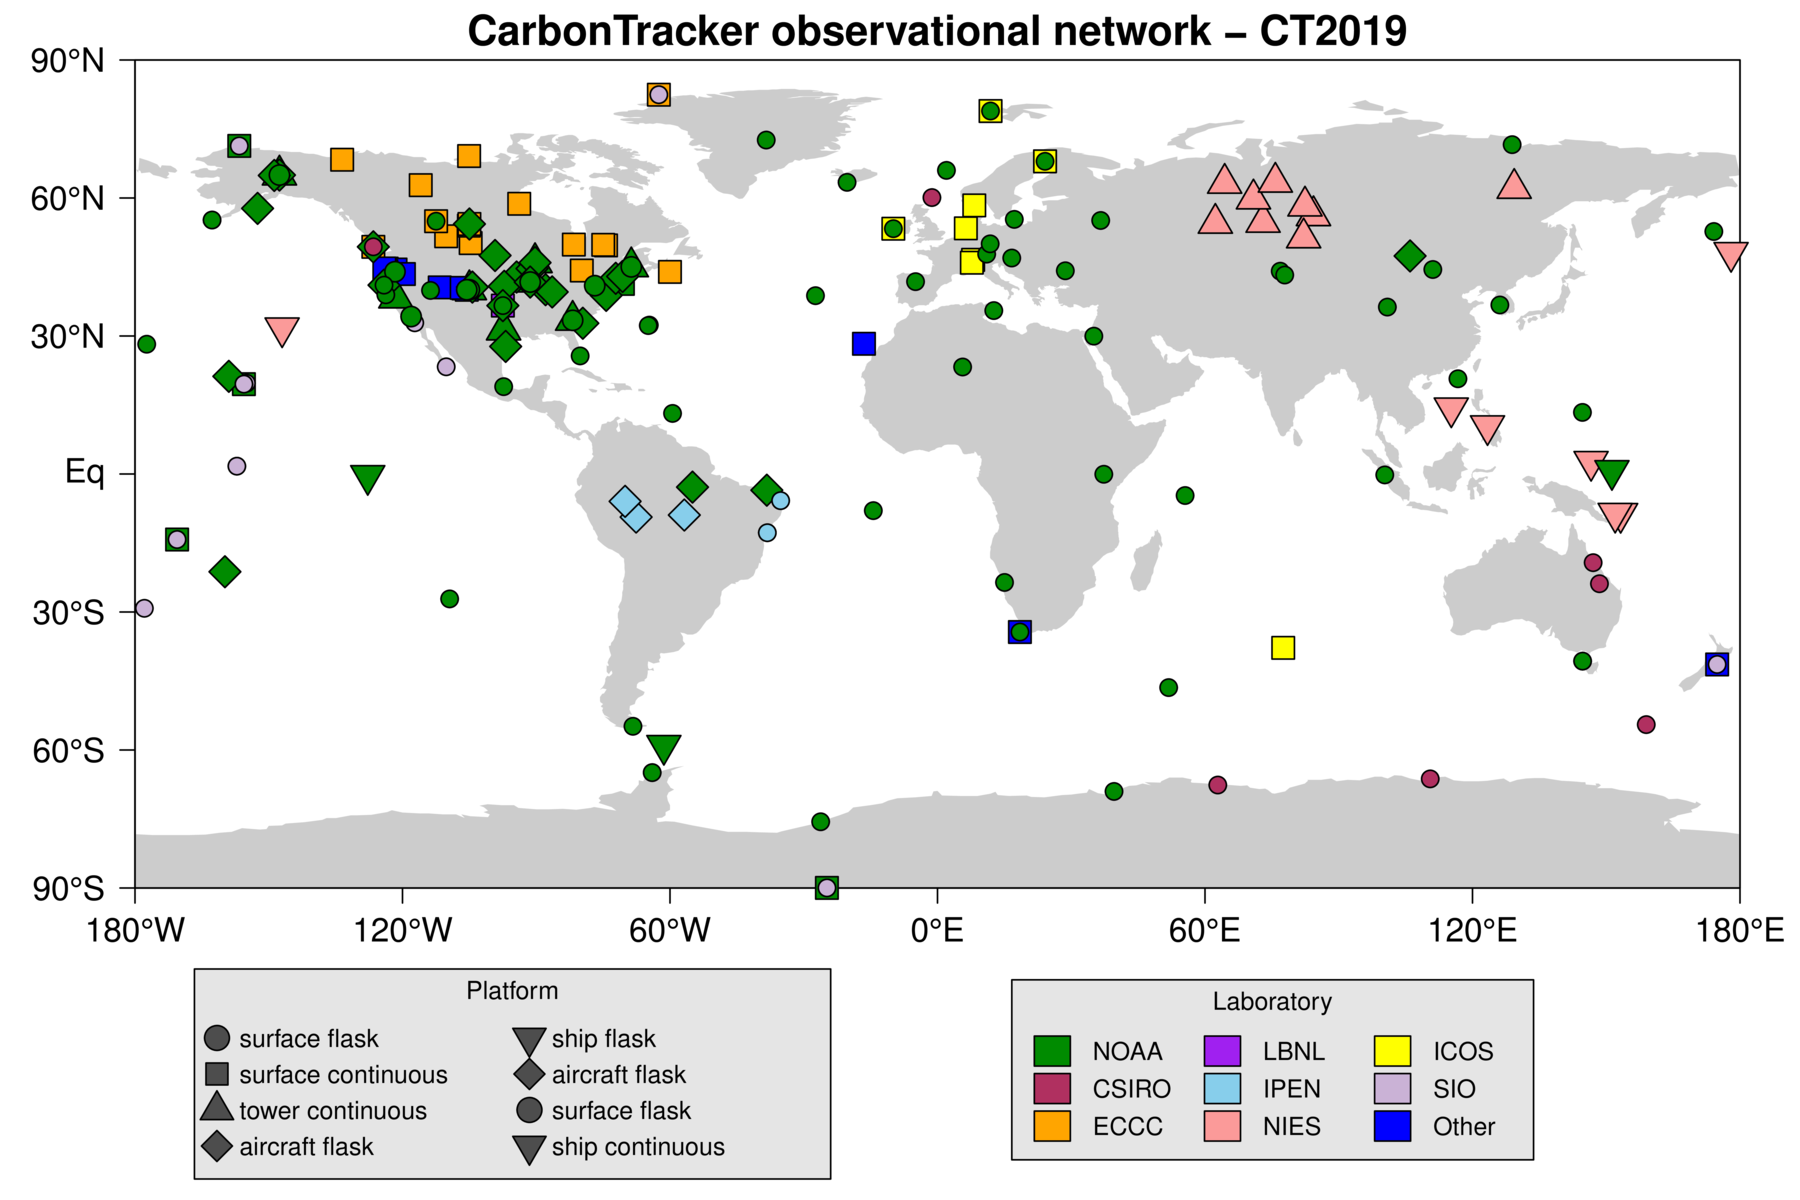 /webdata/ccgg/CT2019/summary/network-global.png